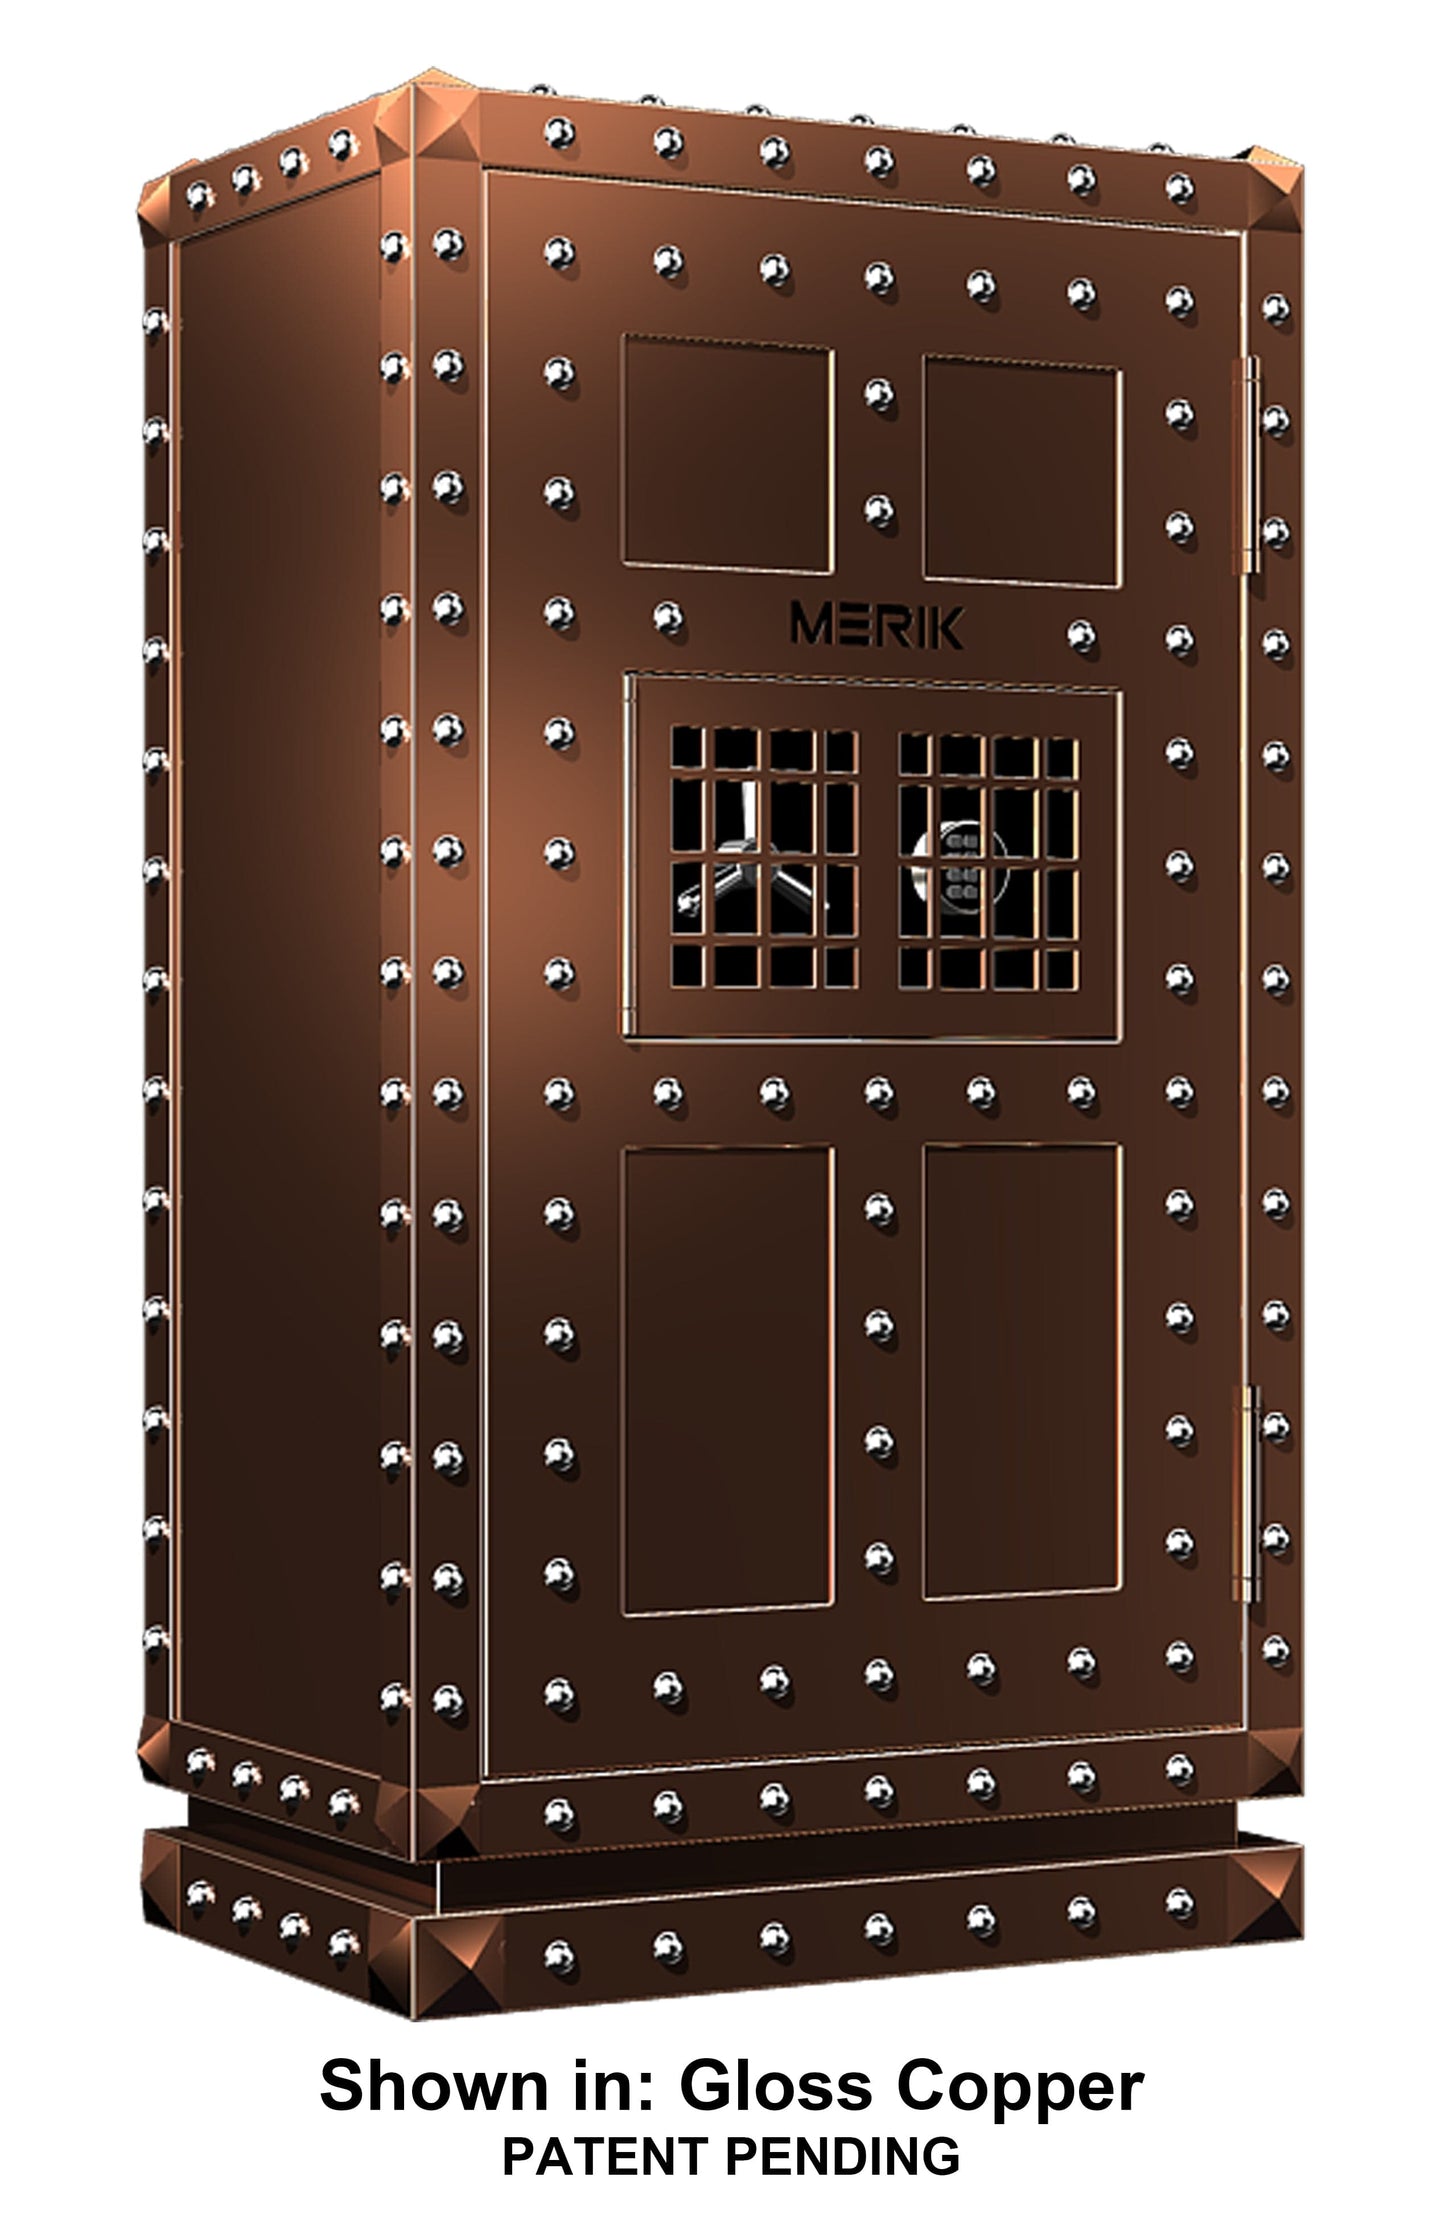 MERIK Dungeon Burglary and Fire Rated Gun Vault - 72’’h x 42”w x 28’’d - 42 Gun Capacity - Patented - Available early 2024